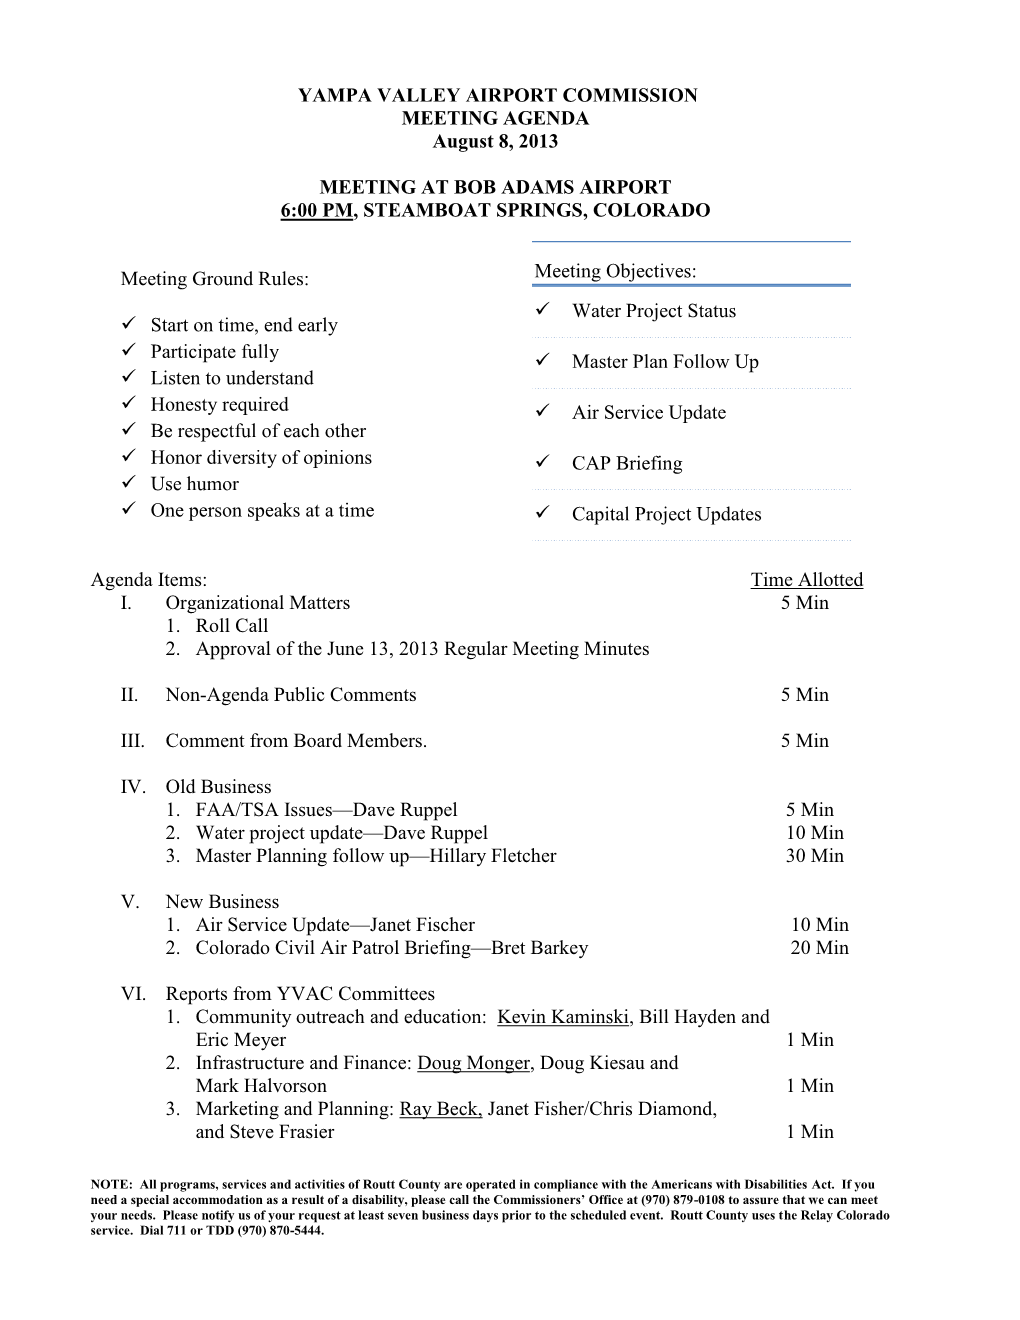 YAMPA VALLEY AIRPORT COMMISSION MEETING AGENDA August 8, 2013